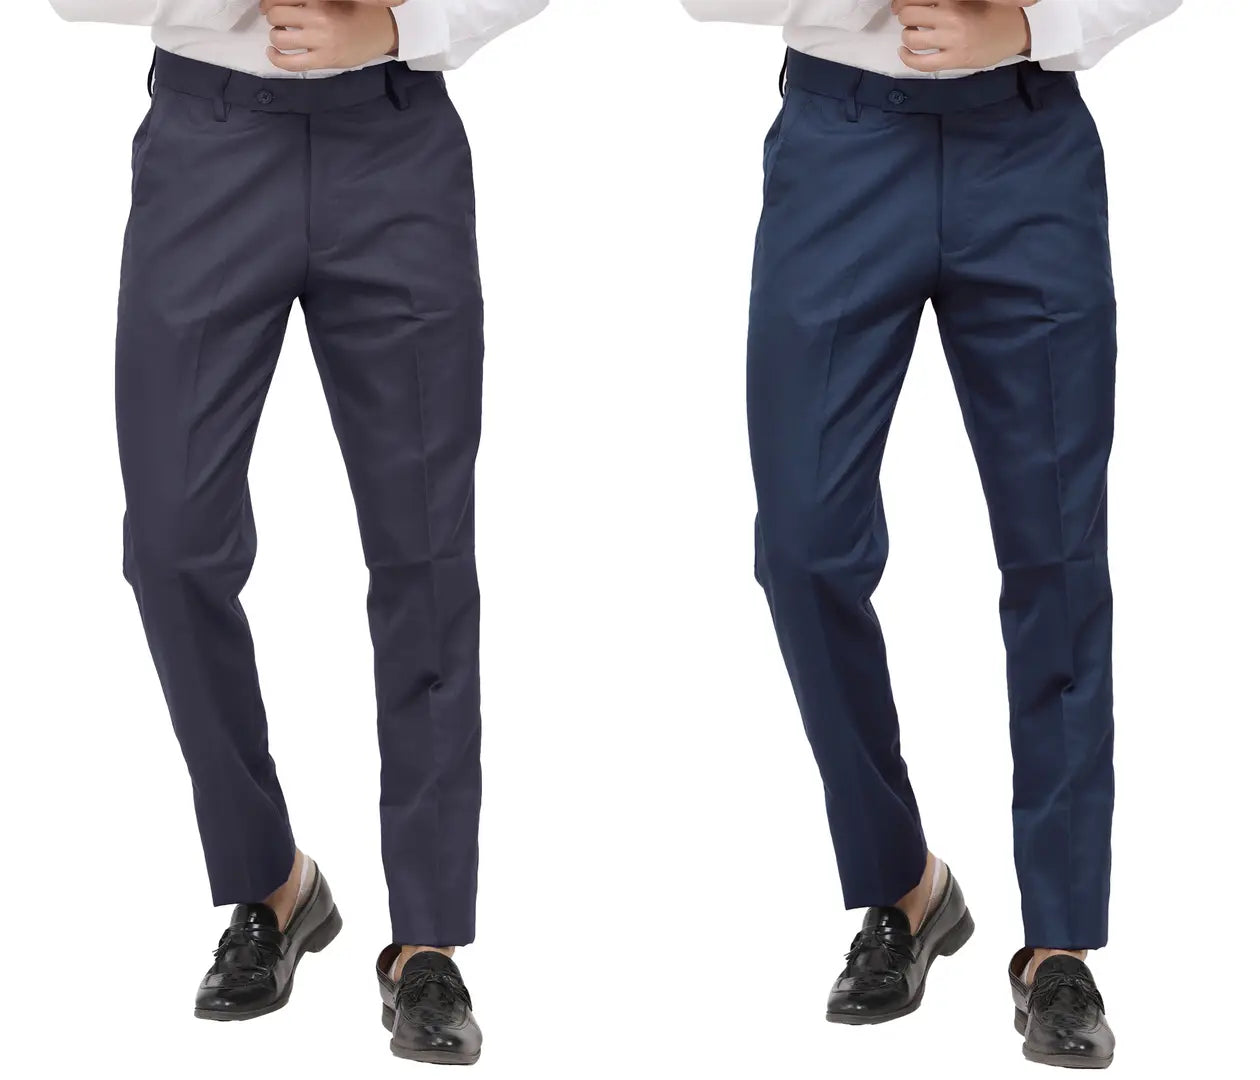 Kundan Men Poly-Viscose Blended Dark Grey and Navy Blue Formal Trousers ( Pack of 2 Trousers )